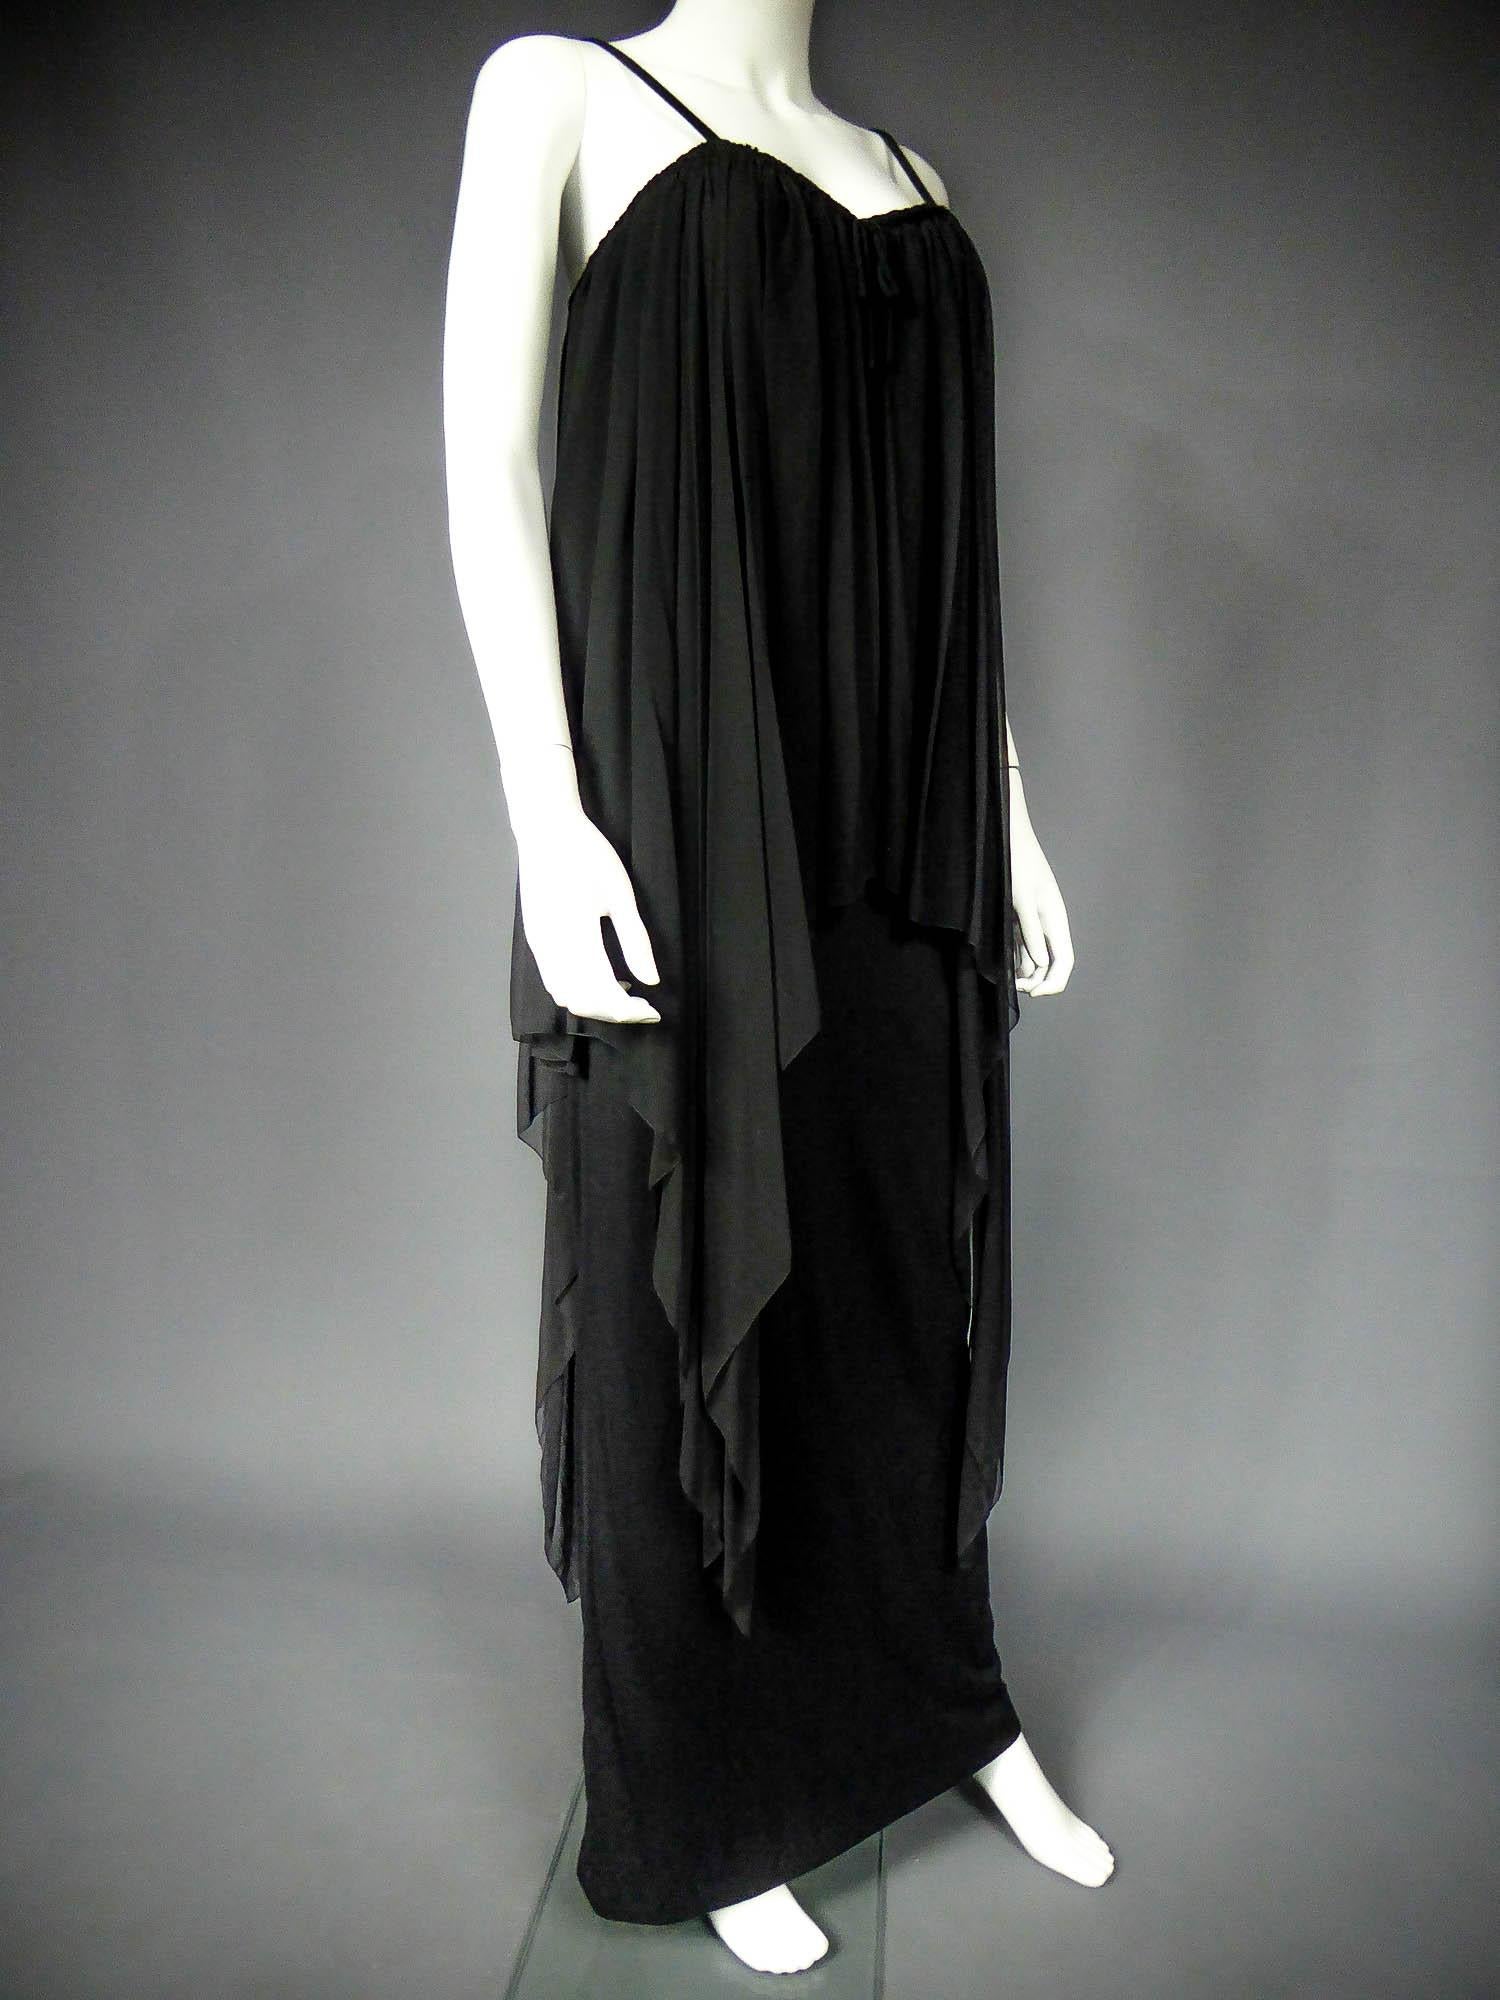 A Christian Dior Haute Couture Evening Dress by Marc Bohan Circa 1975 For Sale 6